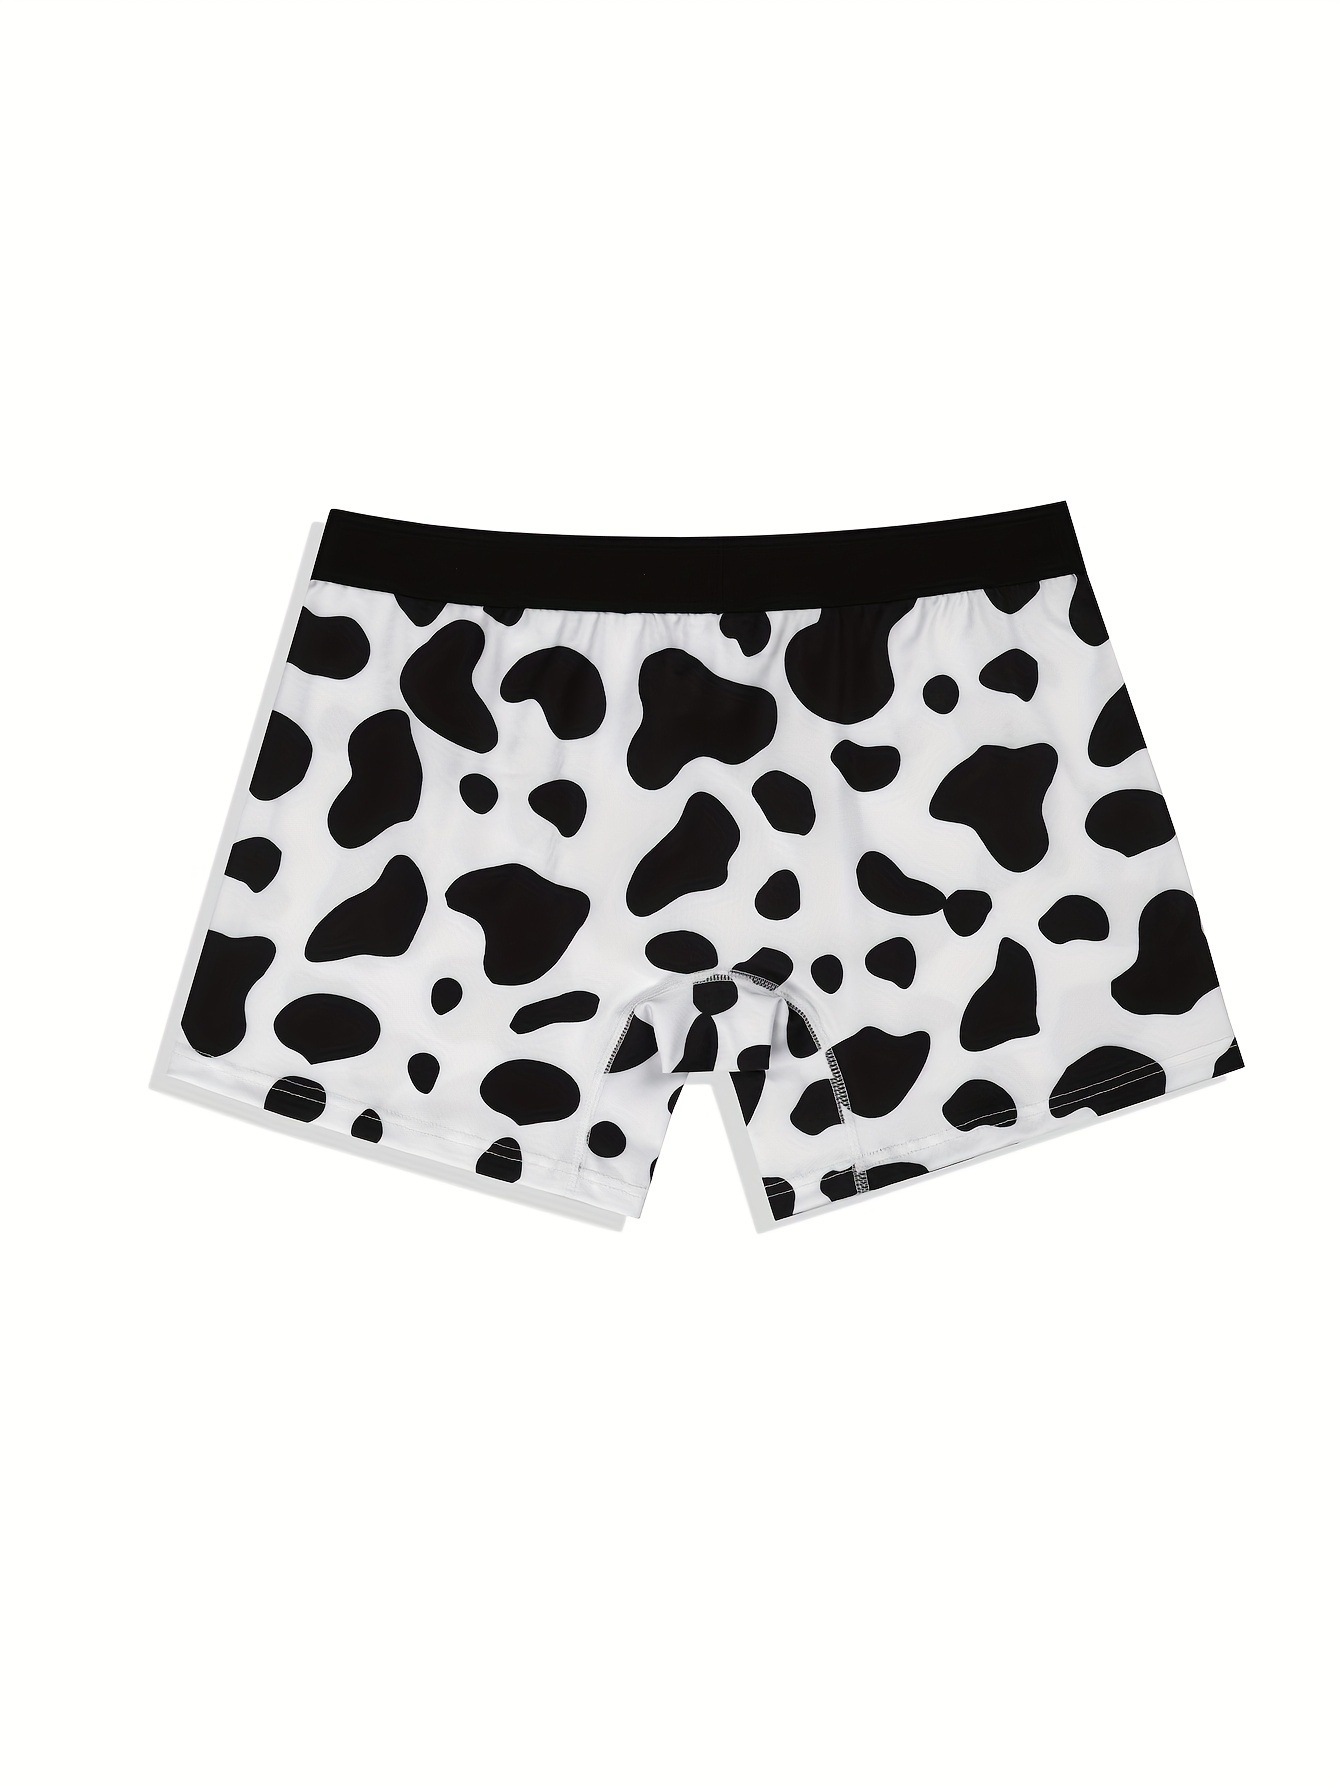 Help me find comfortable boxer shorts that are flattering for